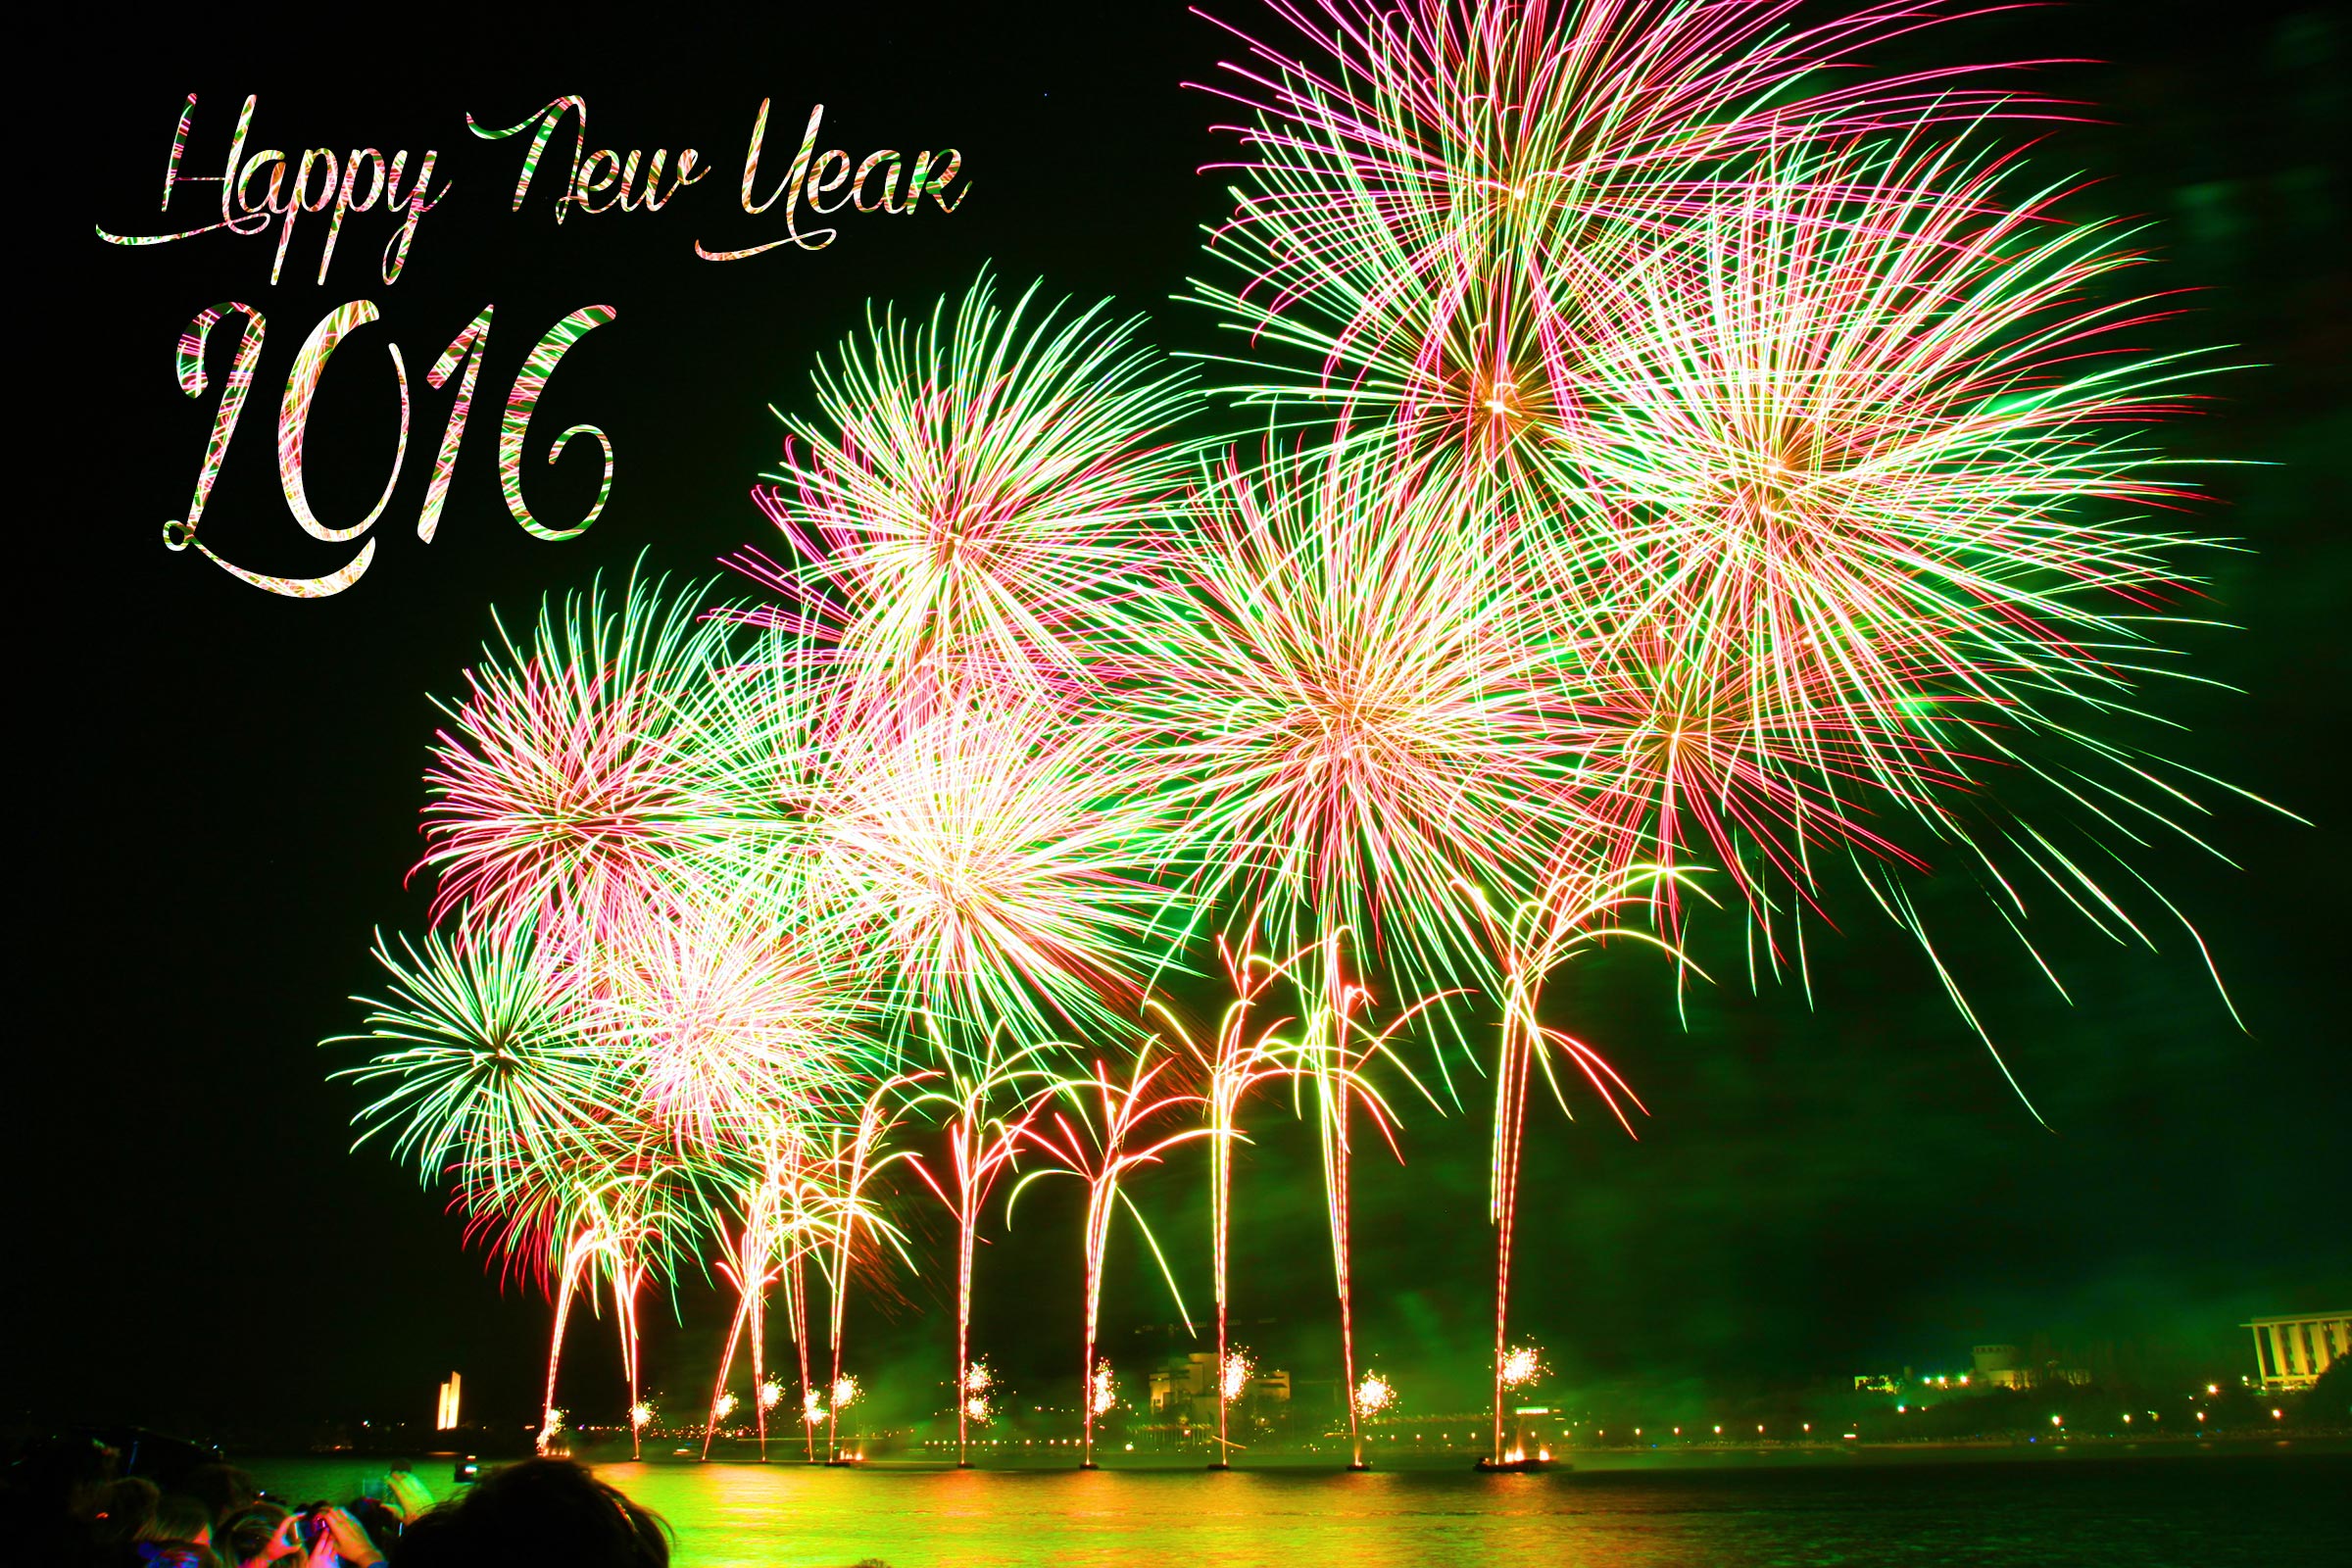 Happy New Year 2016 Wallpapers HD Images Facebook Cover photos 2400x1600